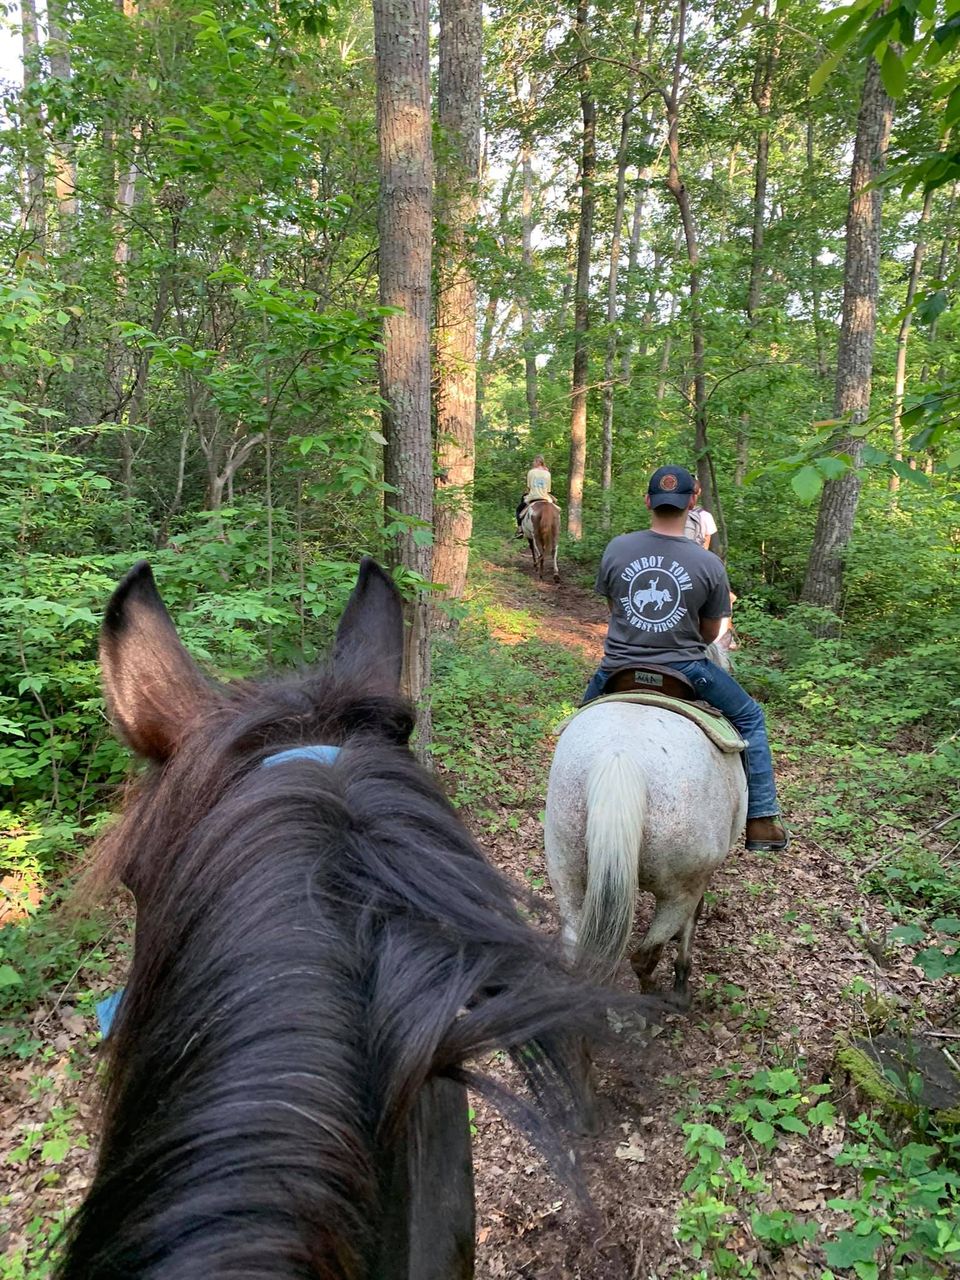 Horse Back Riding- Montgomery's Outdoor Adventure